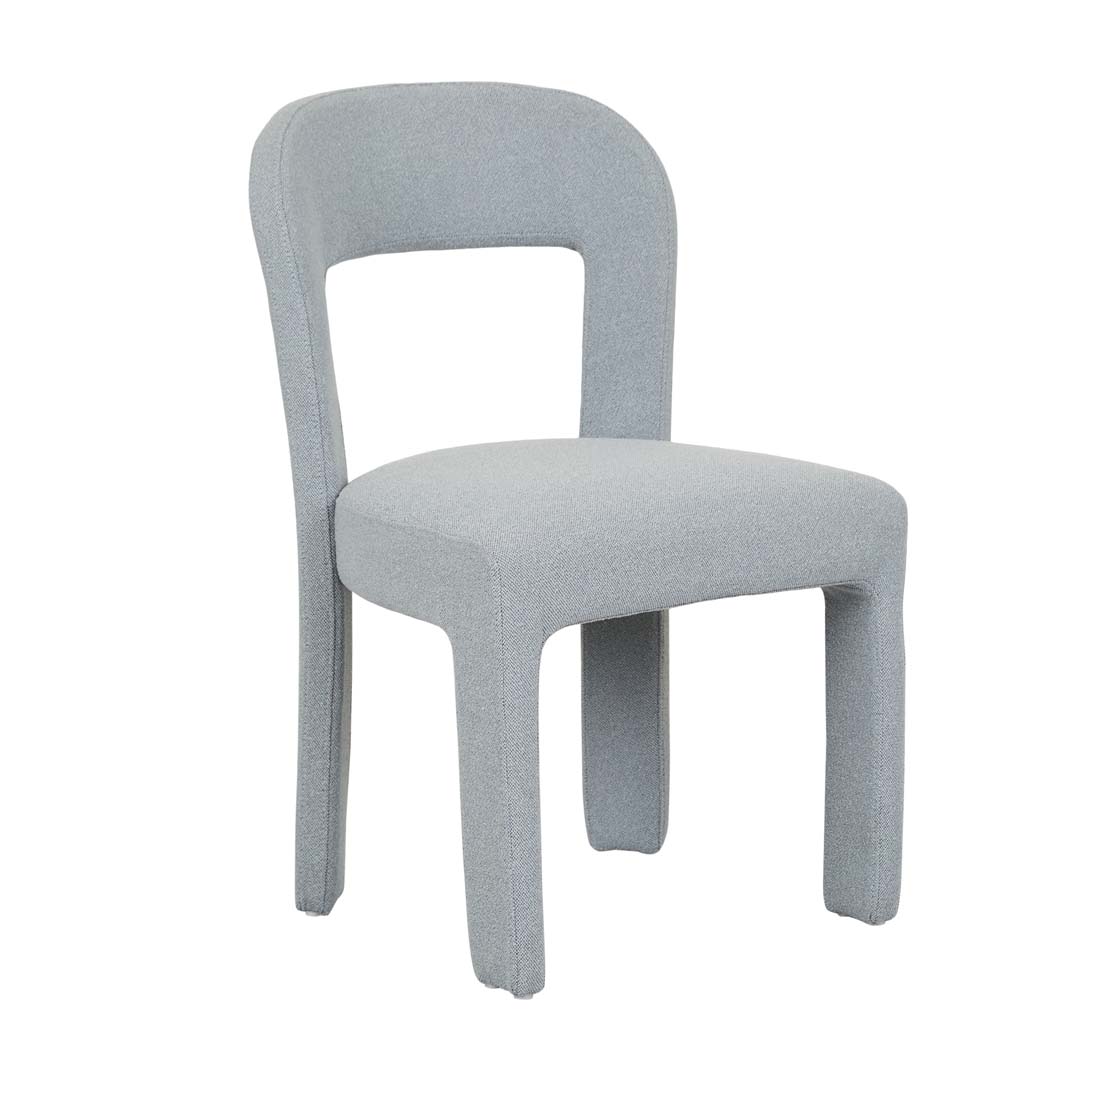 Eleanor Dining Chair image 22